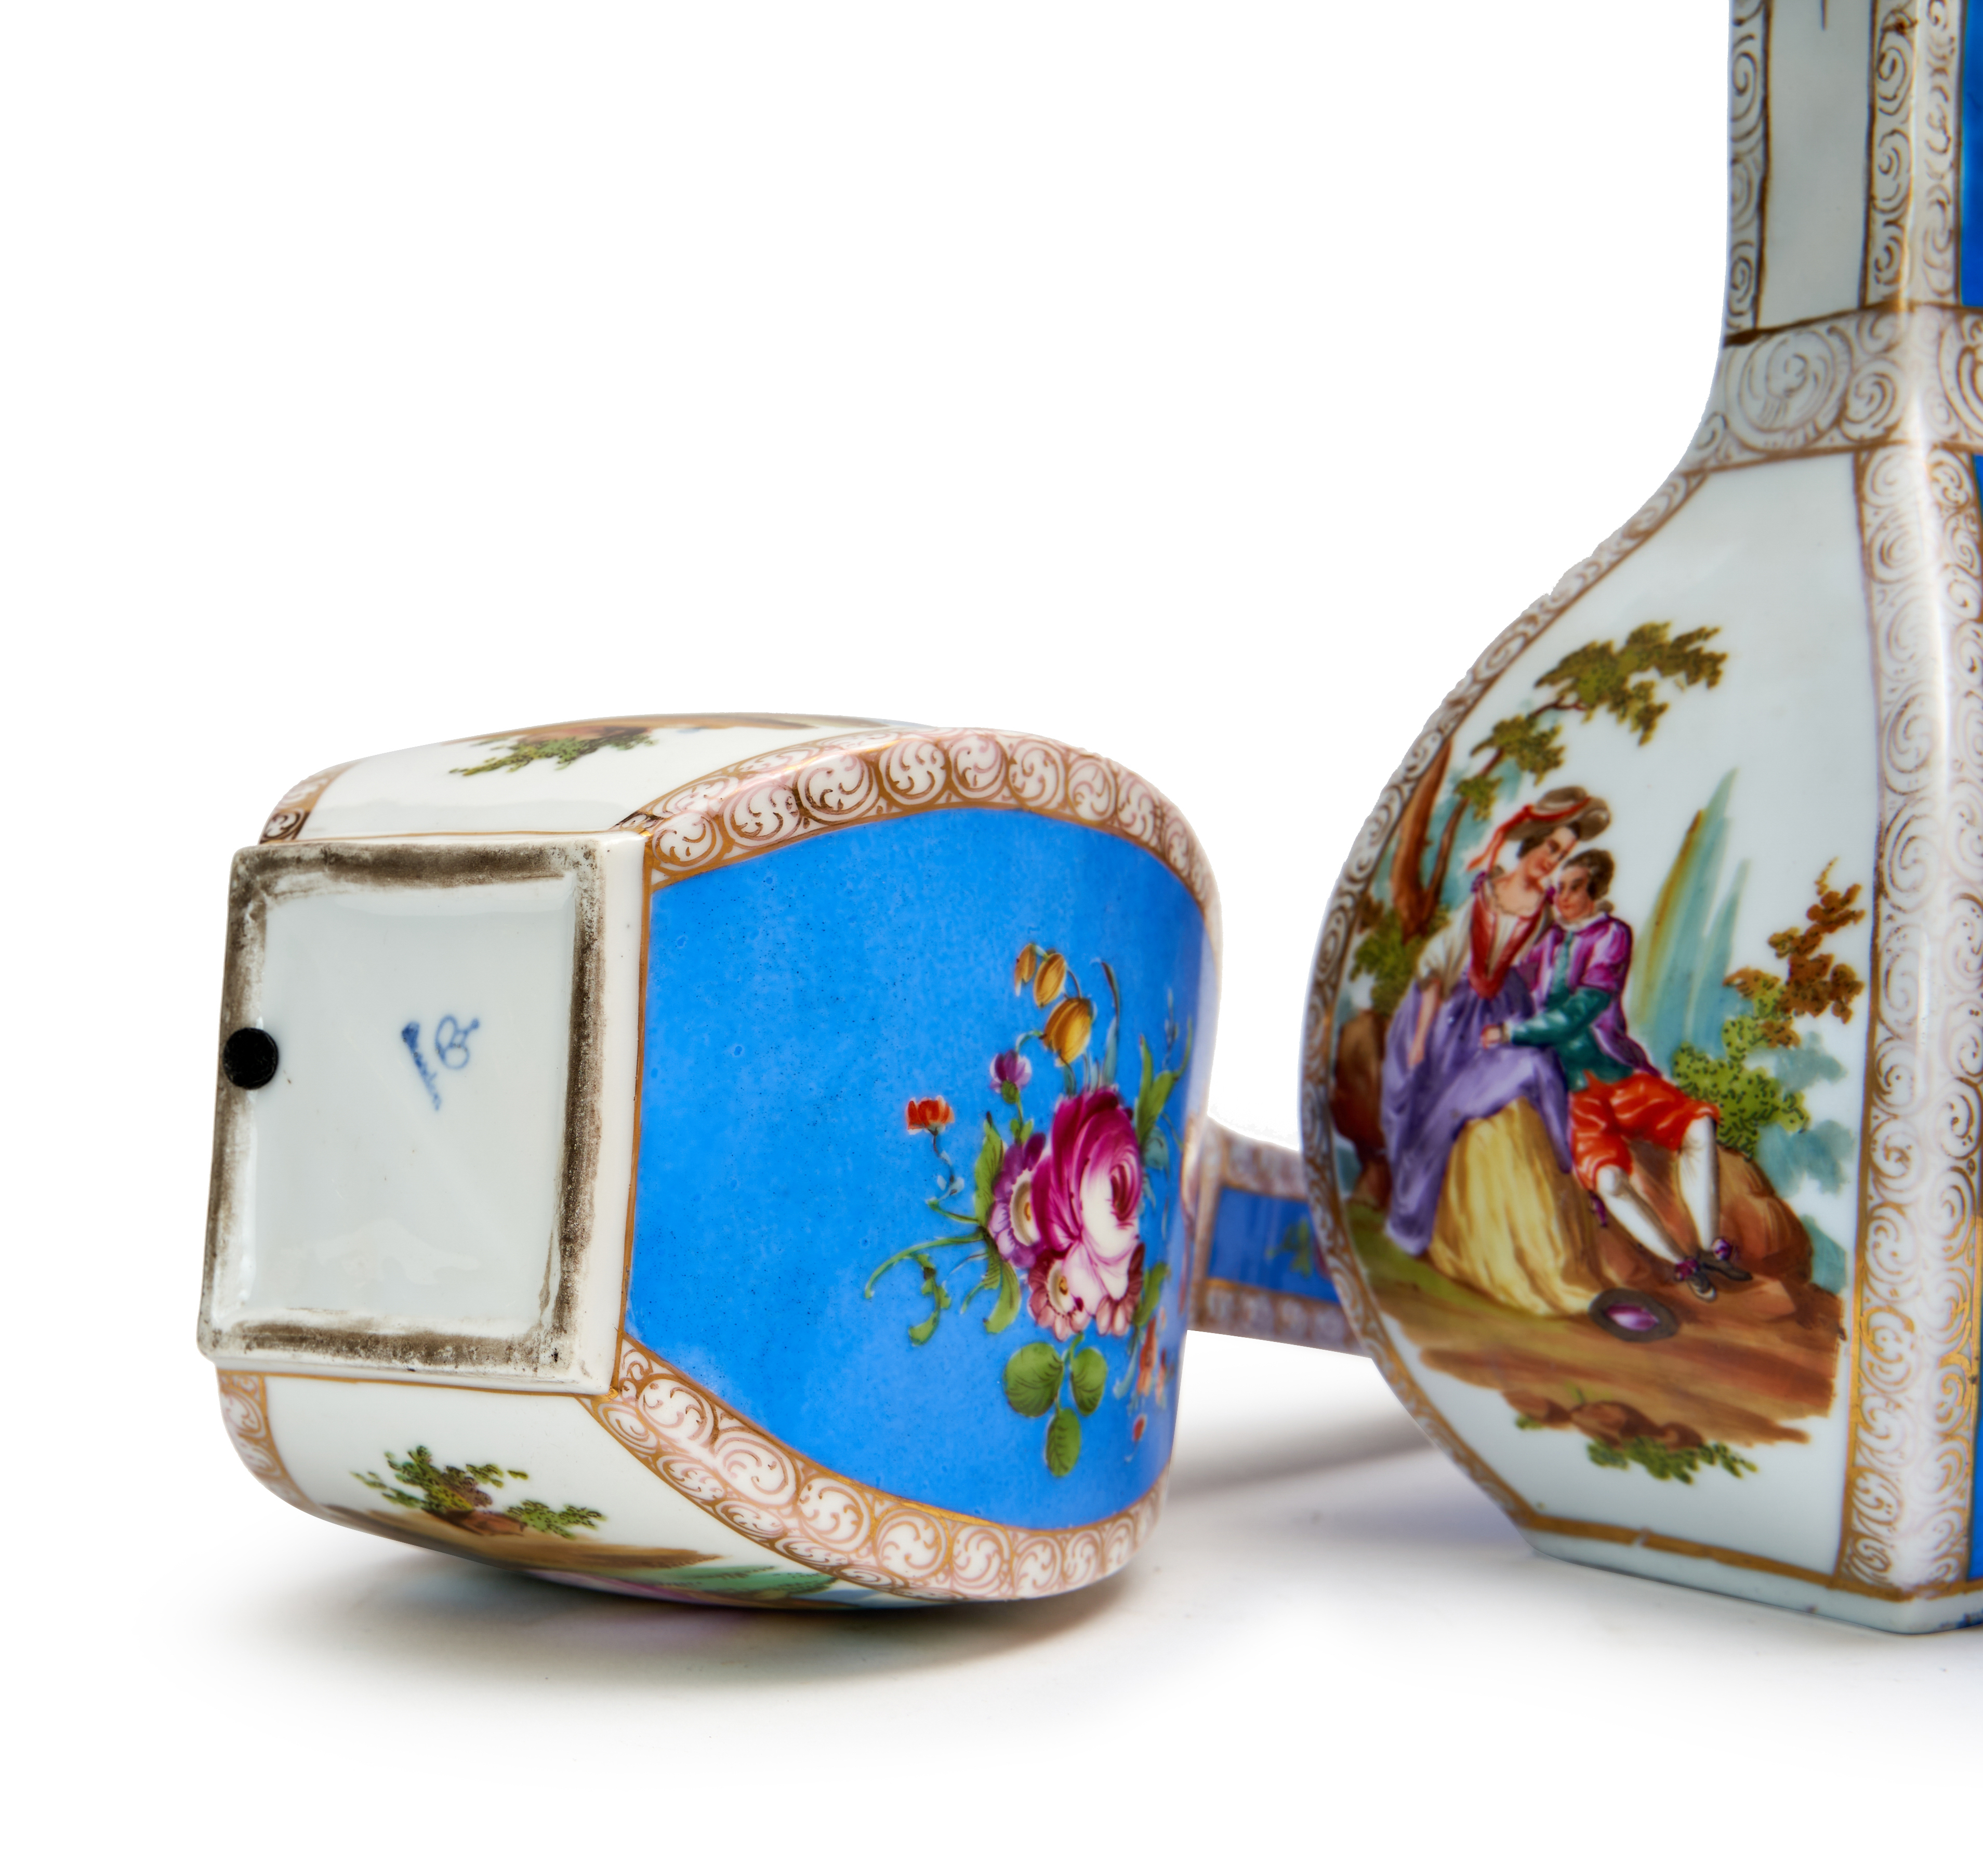 A PAIR OF GERMAN PORCELAIN VASES, PROBABLY DRESDEN - Image 3 of 3